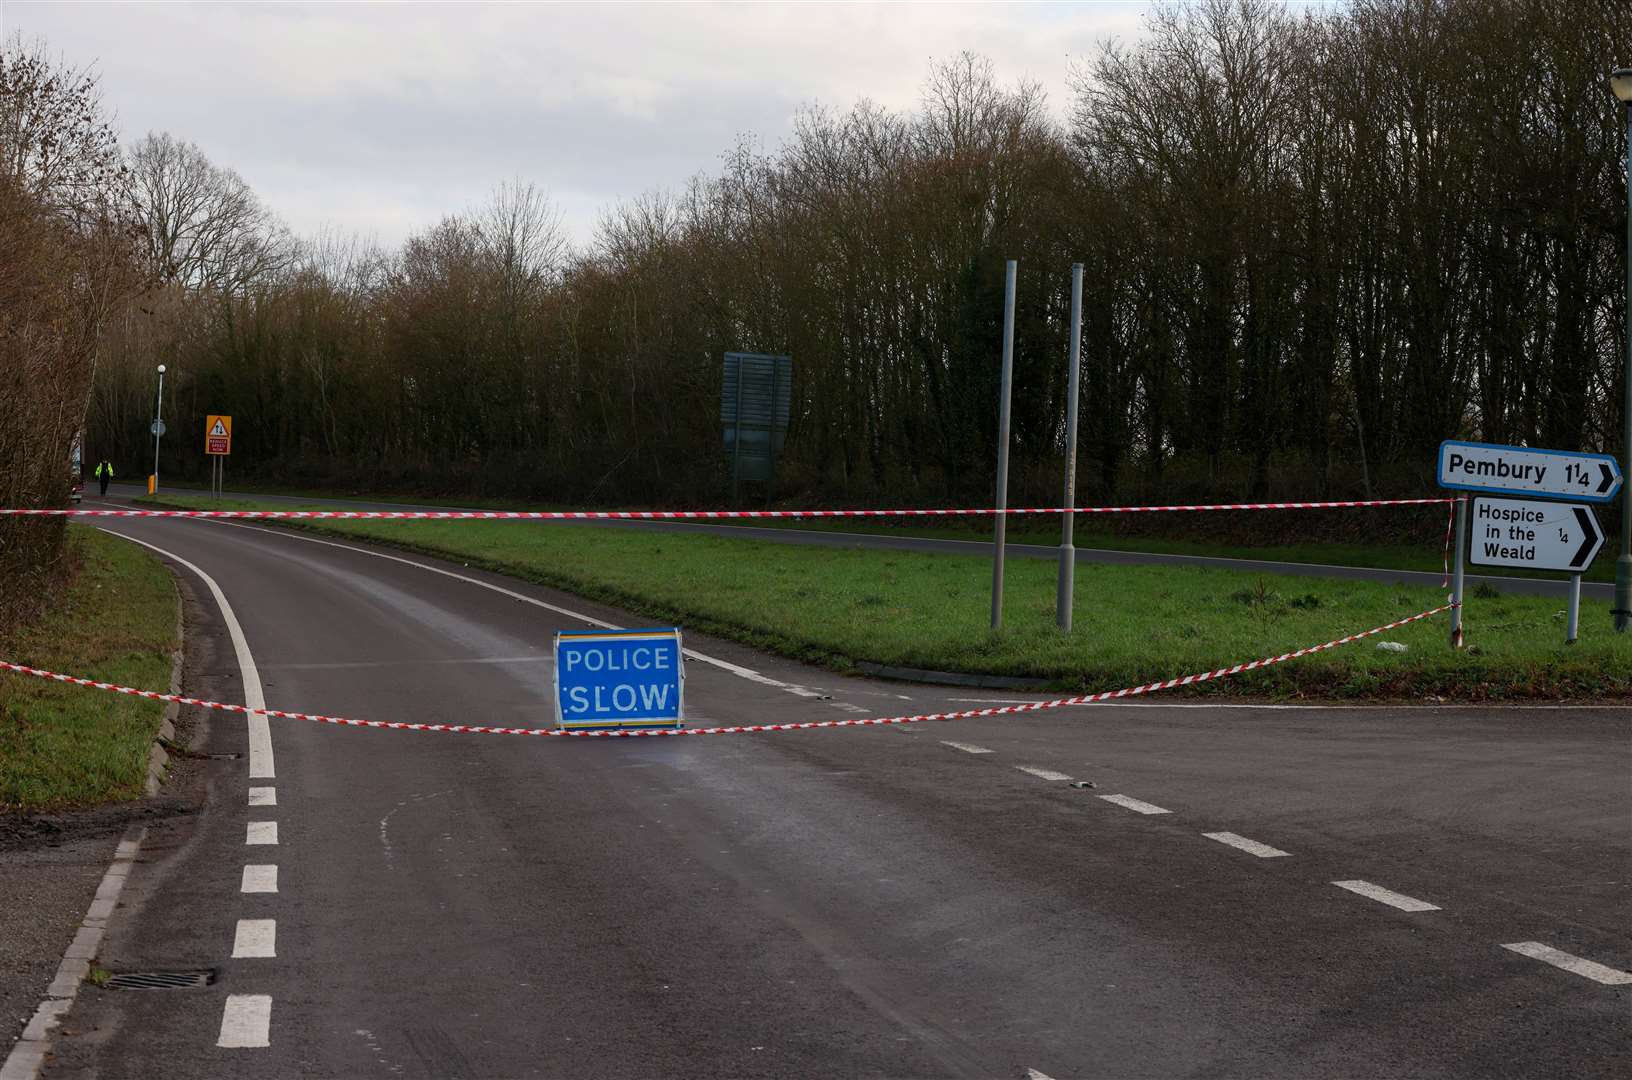 Police closed the road. Picture: UKNIP